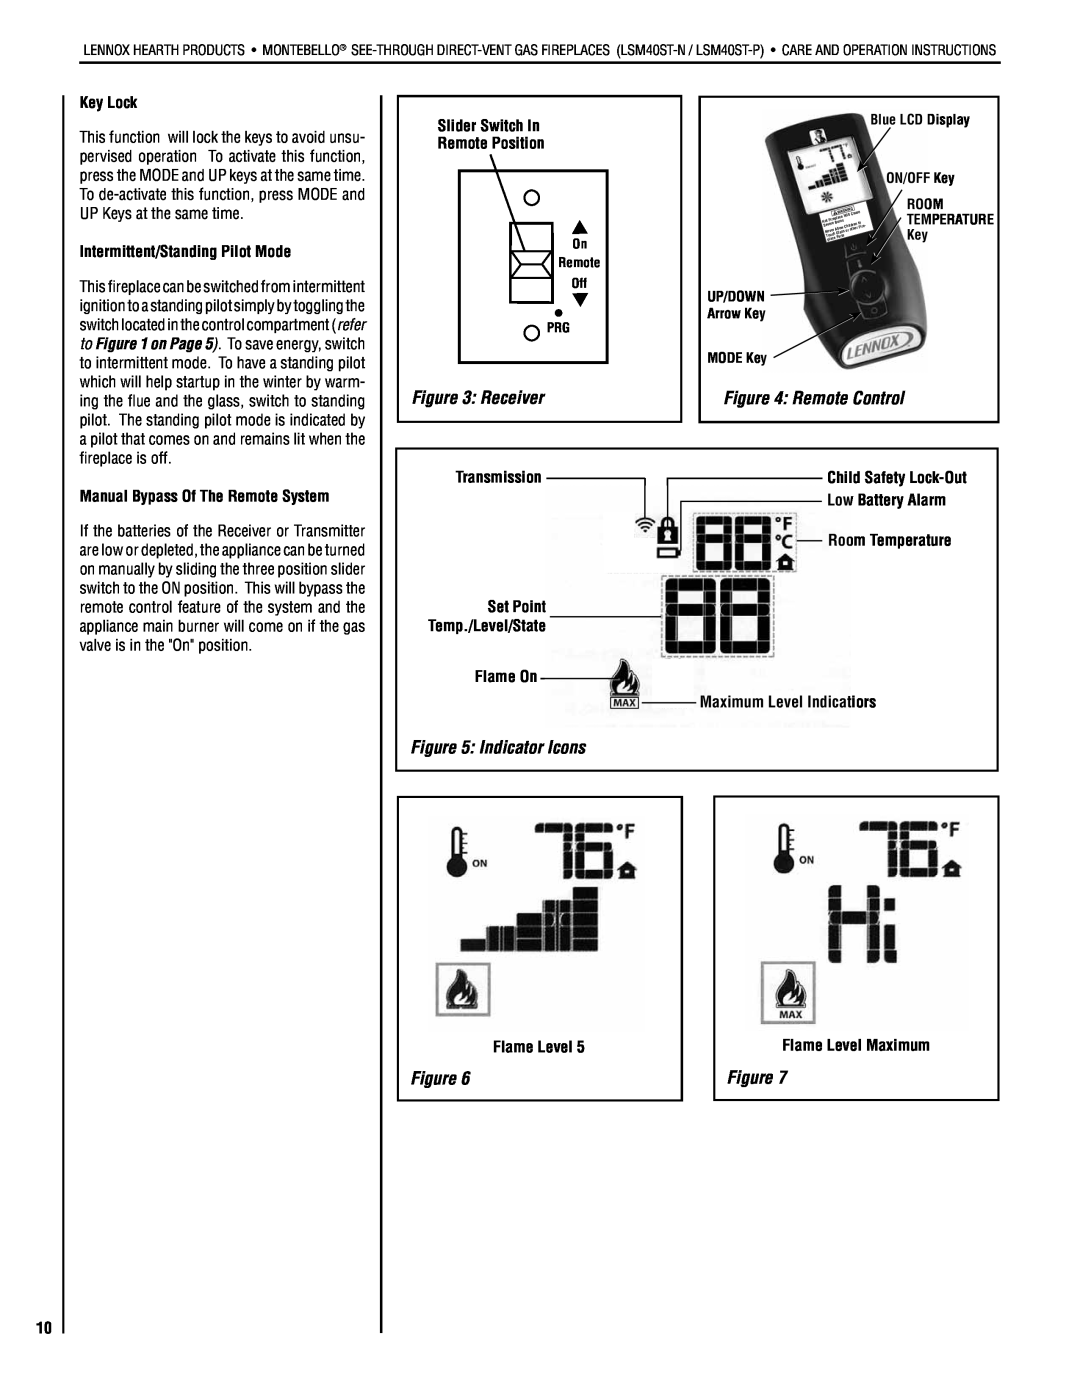 Lennox Hearth LSM40ST-N, LSM40ST-P installation instructions Receiver, Remote Control, Indicator Icons 